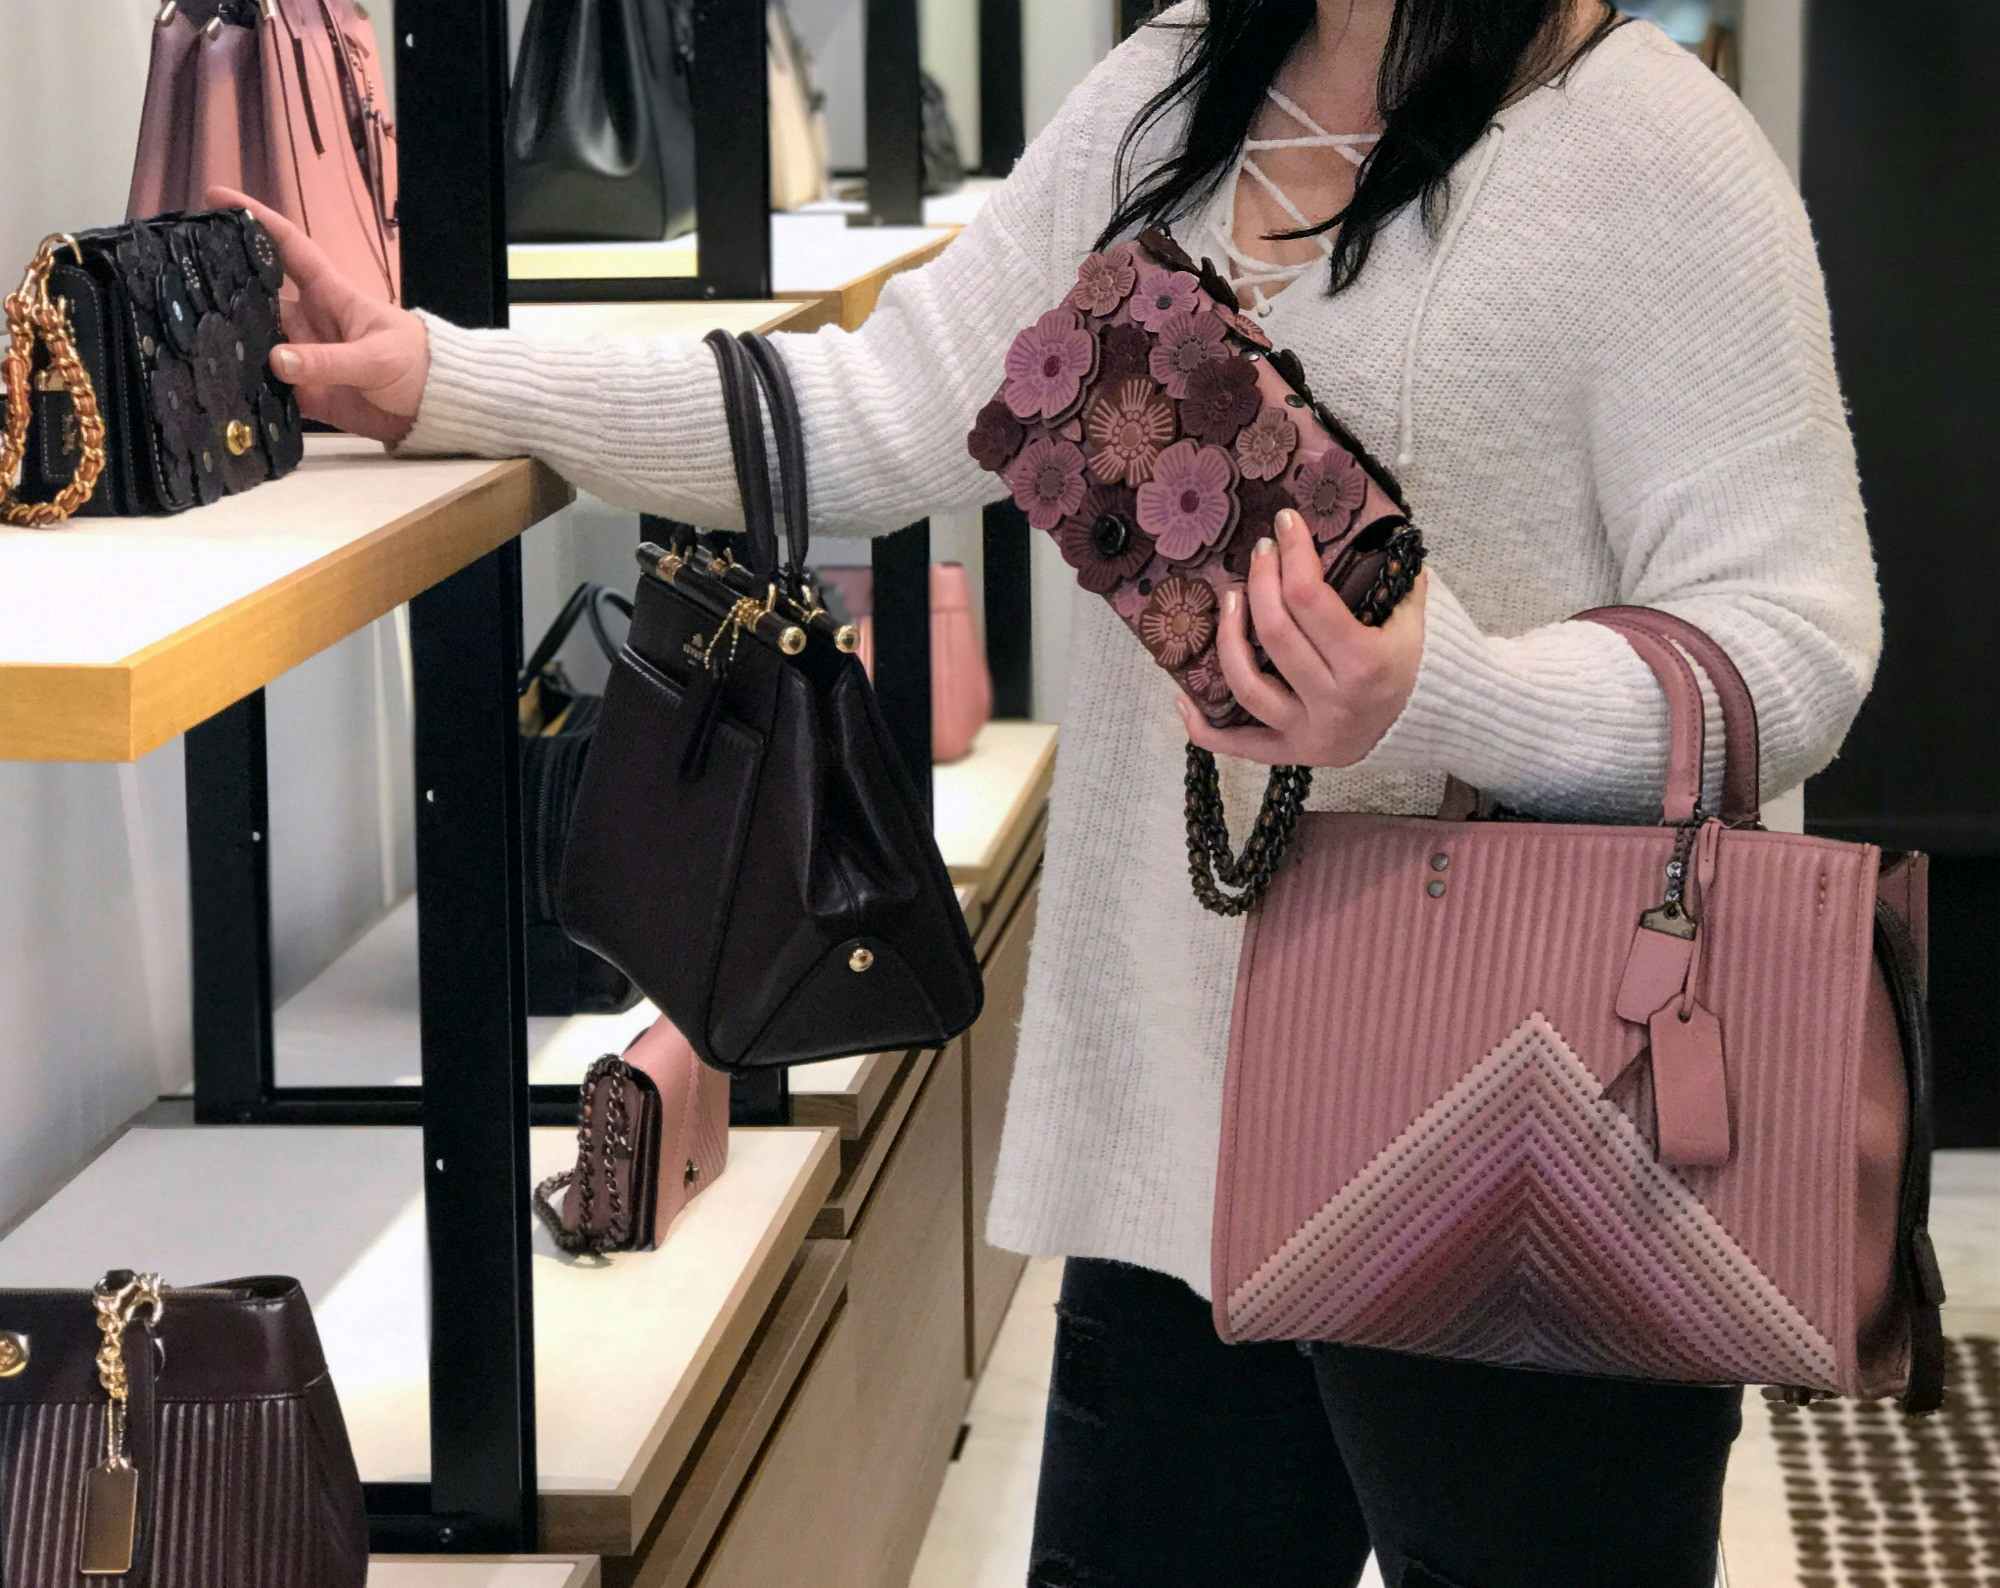 Coach purse: Shop Coach Outlet now for big savings on purses and